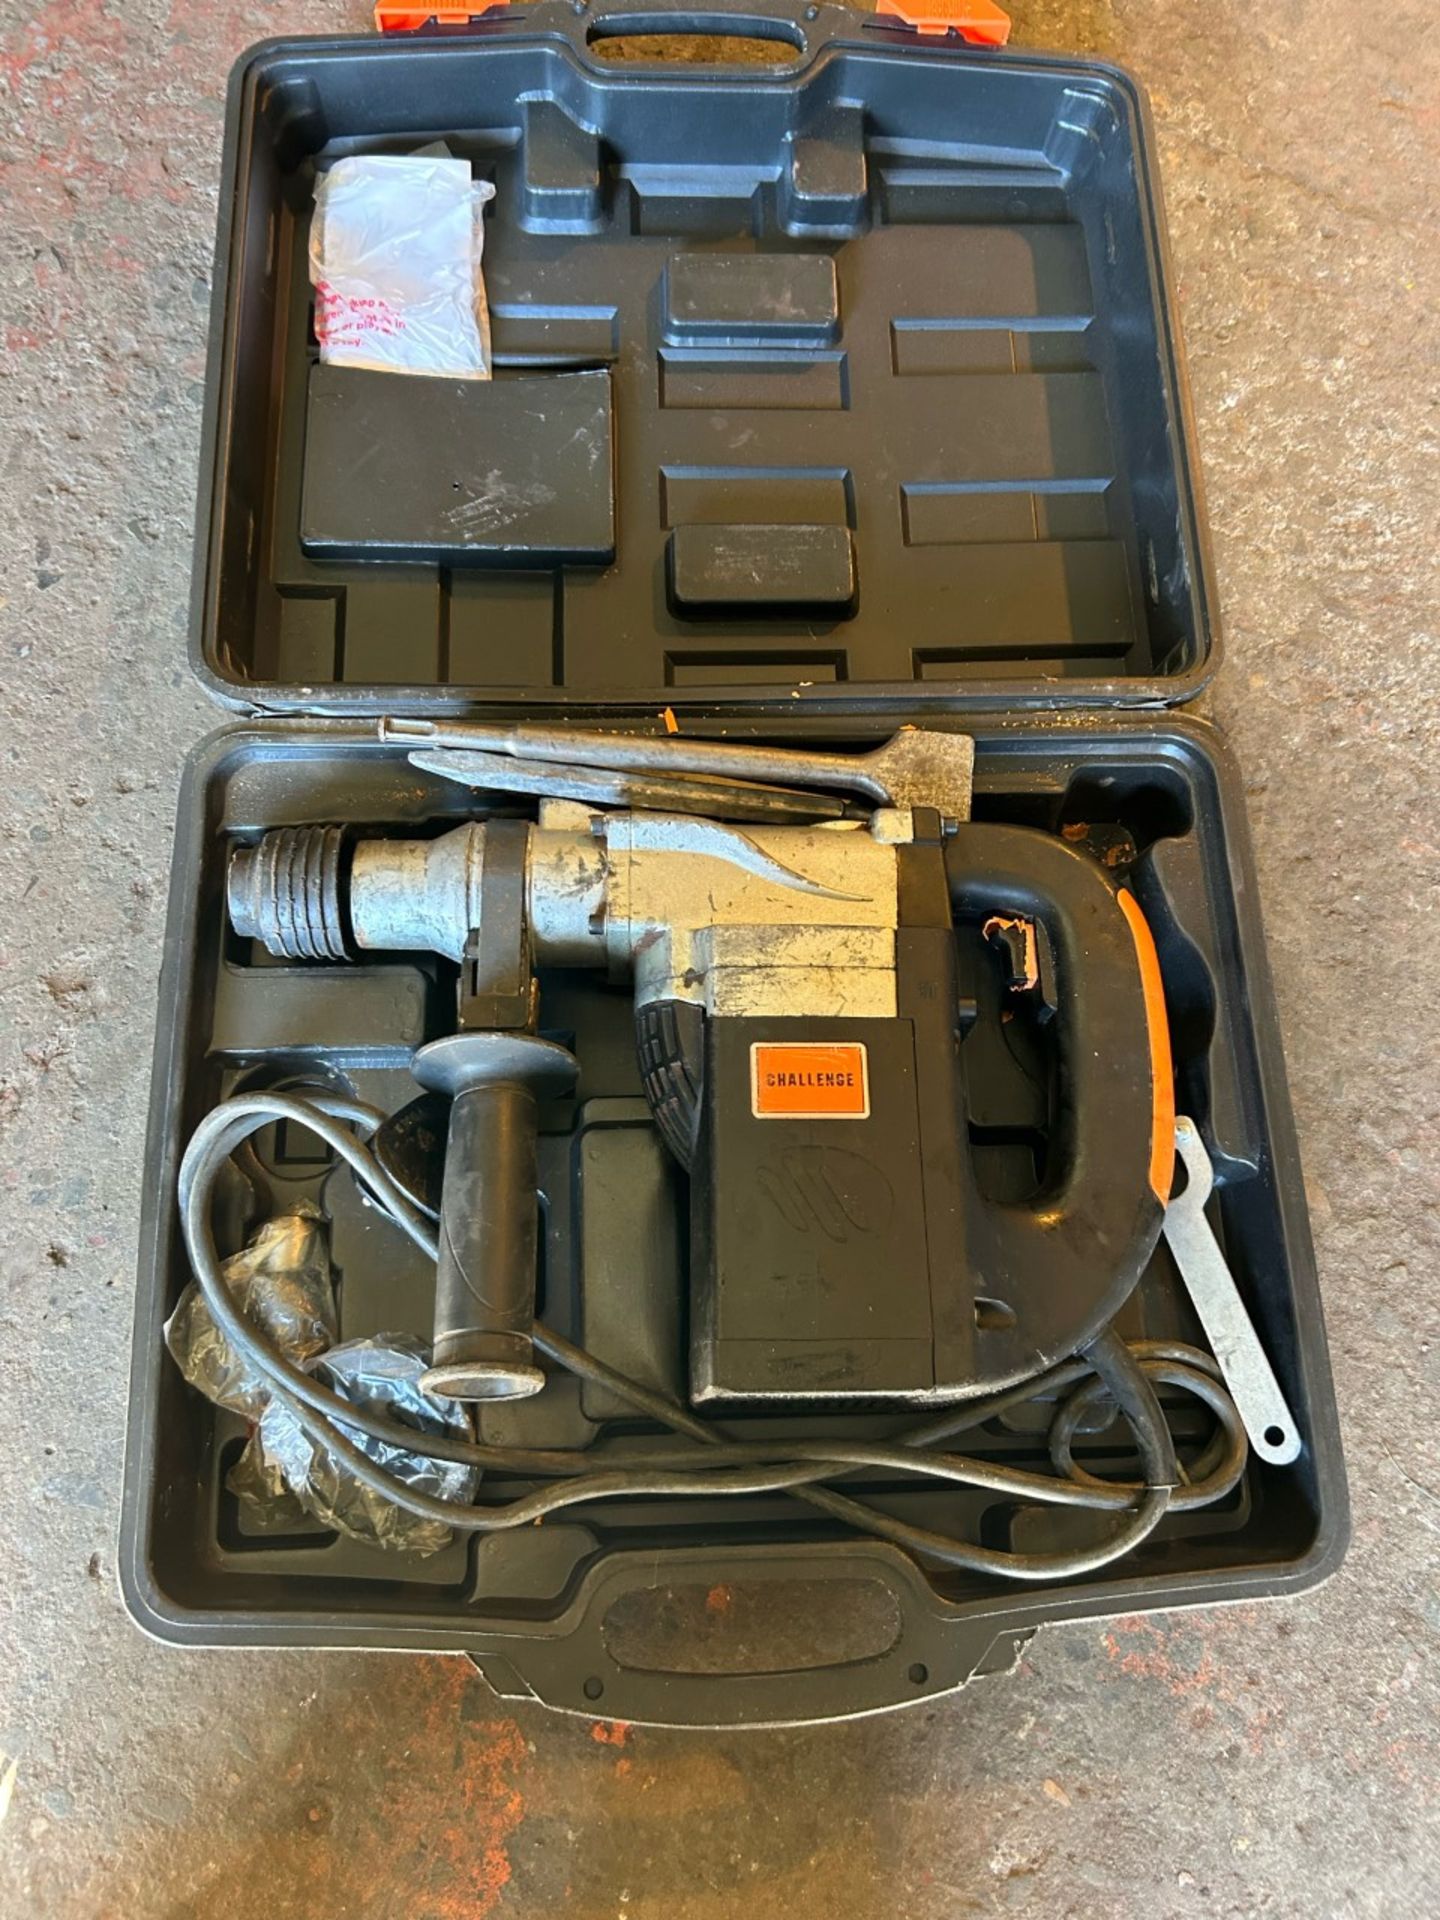 Challenge extreme sds rotary hammer drill. Good condition, full working order as seen in video